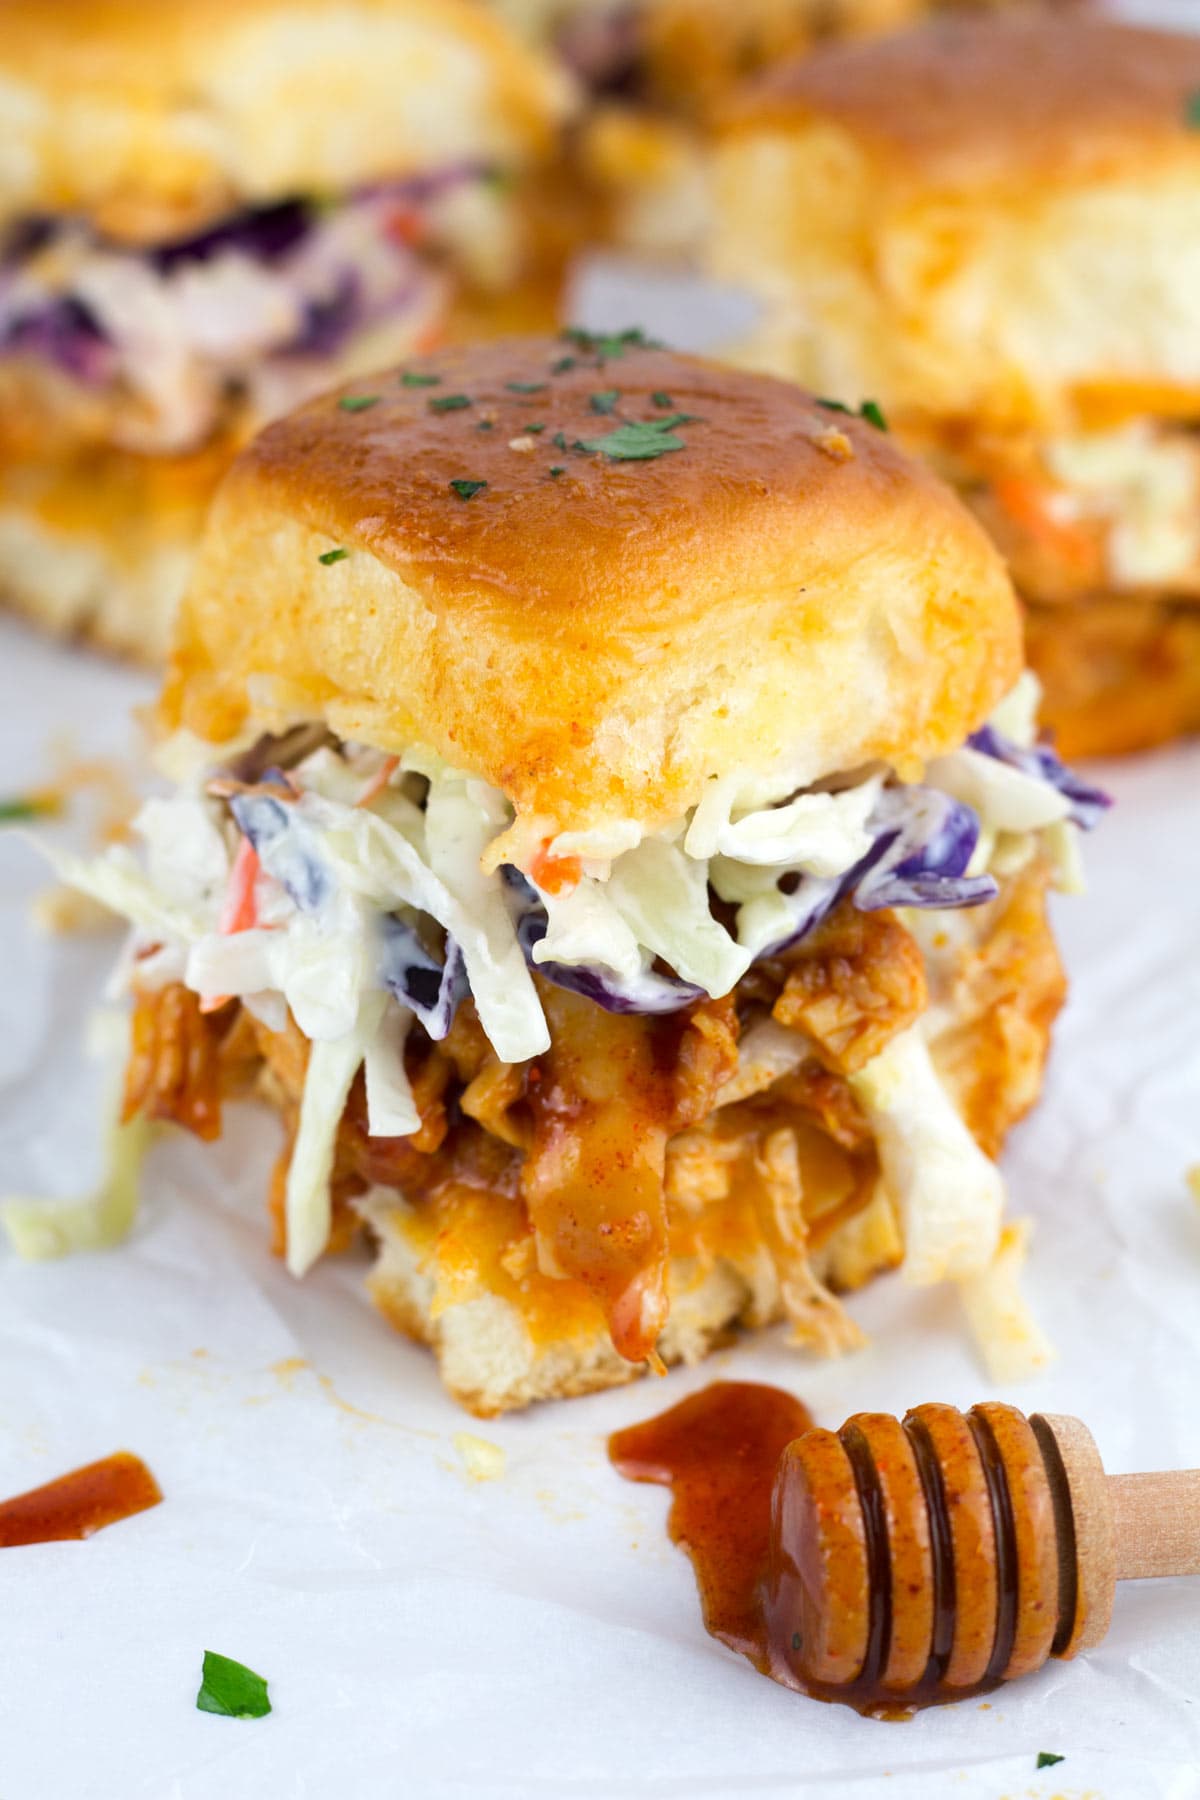 Super up close view of layers of Hawaiian rolls, cheese, shredded chicken, and coleslaw on sliders.